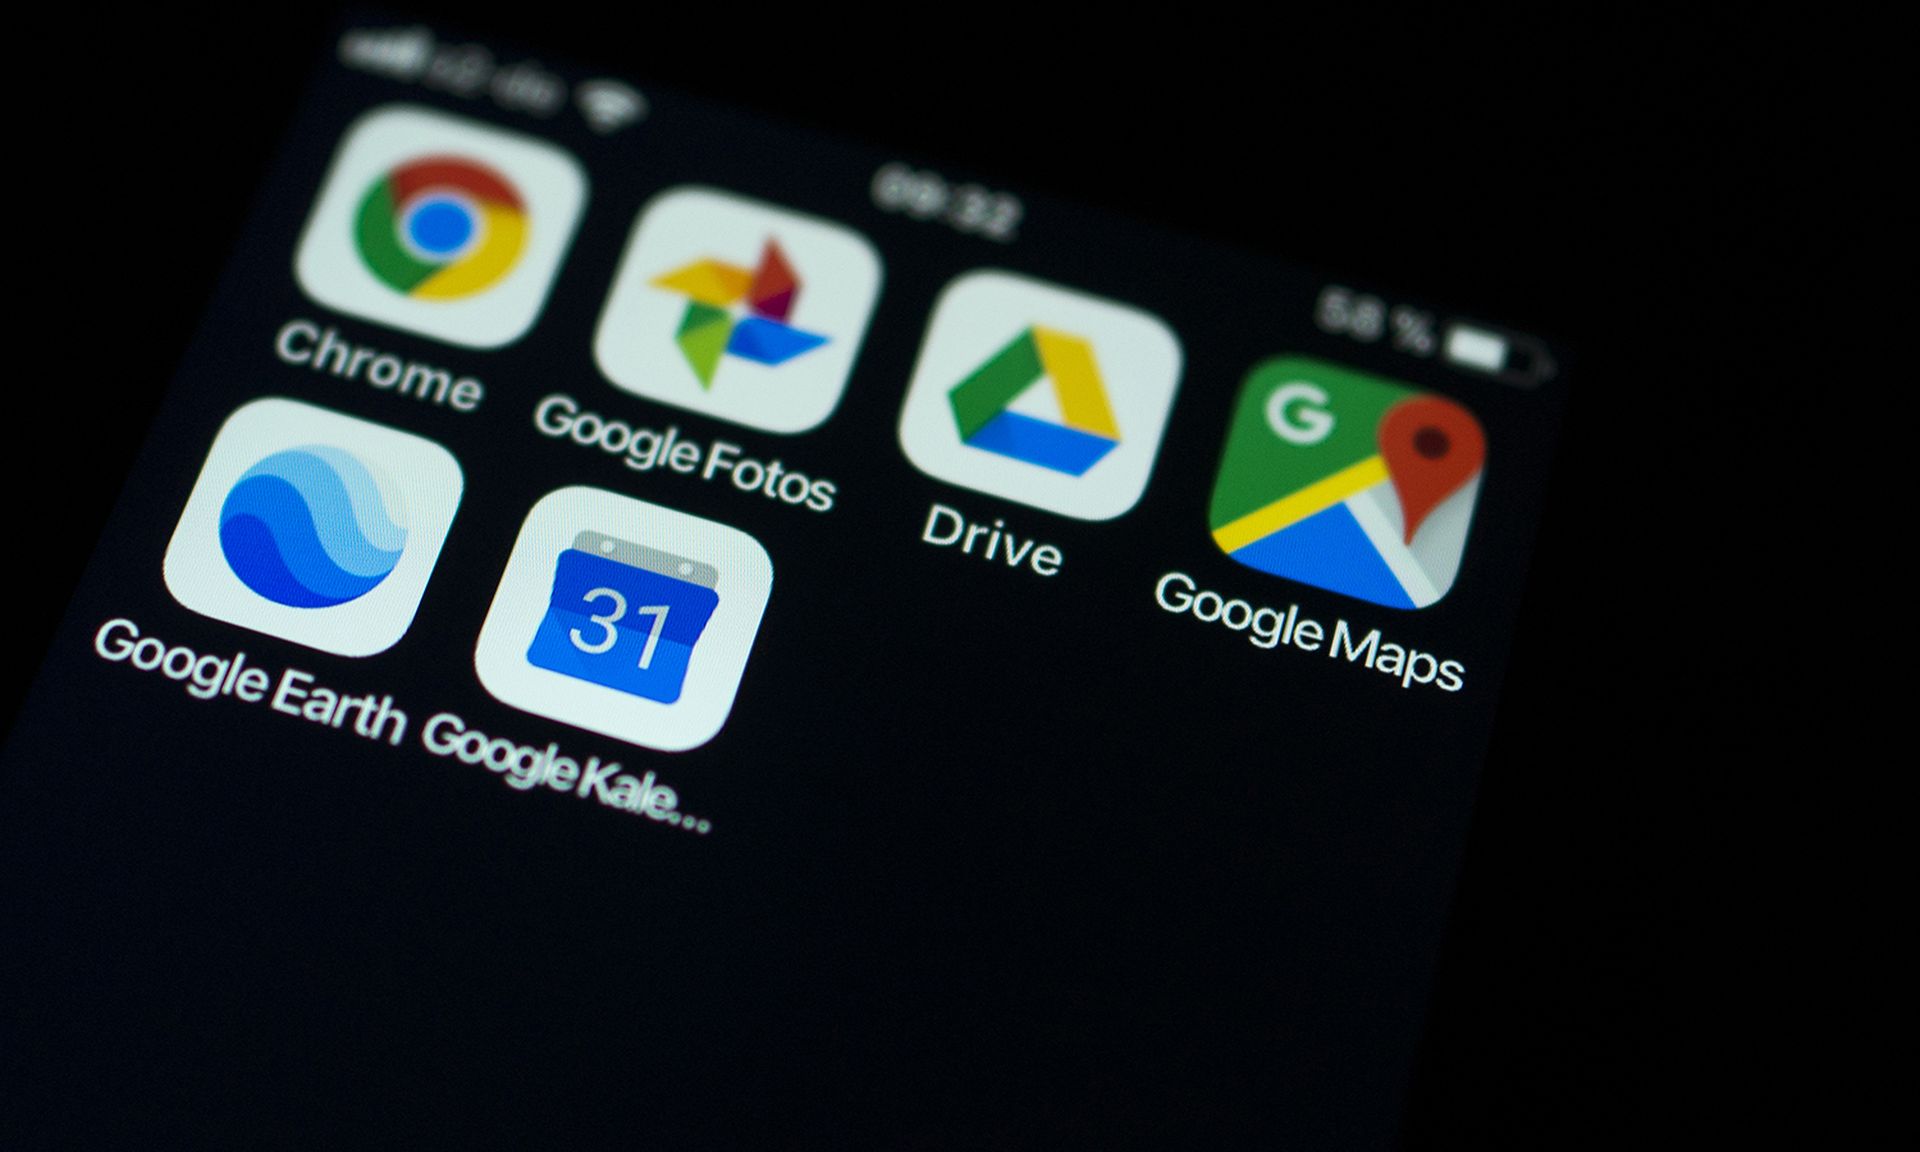 Several Google apps are displayed on a smartphone. (Photo by Carsten Koall/Getty Images)